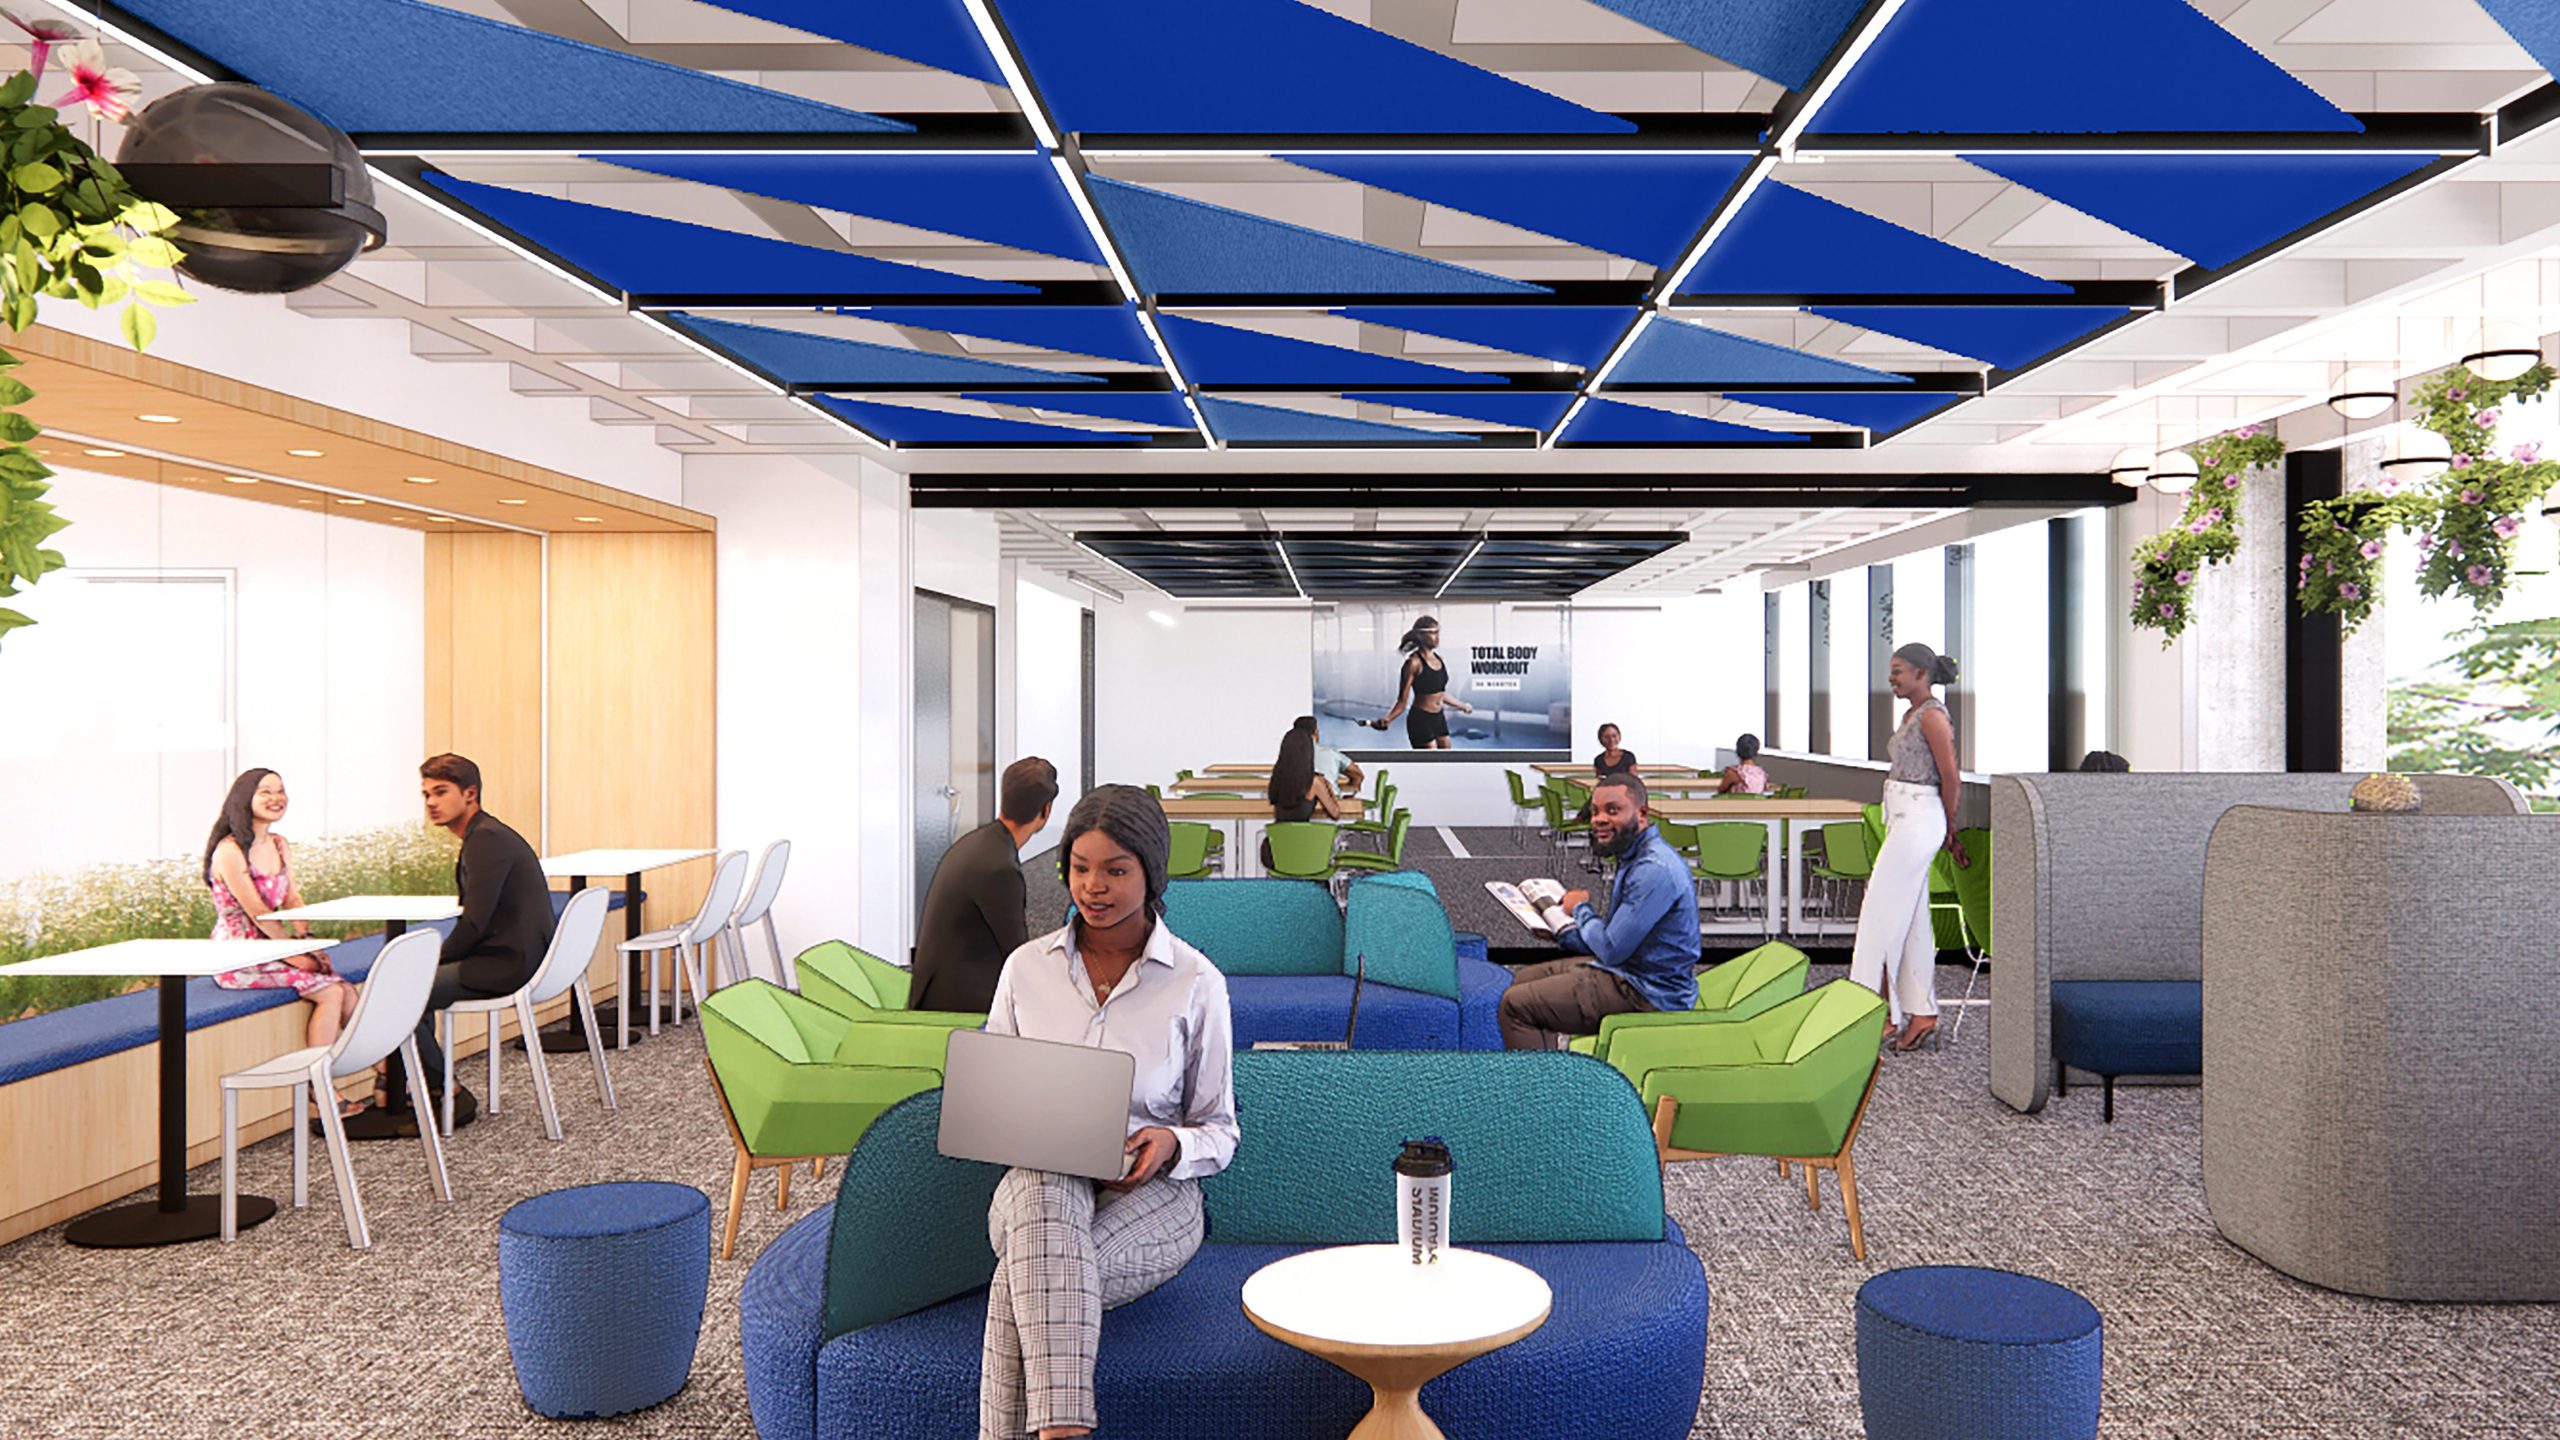 Digital rendering of the interior of the Wellbeing Lab with the blue, green, and grey modular furniture.